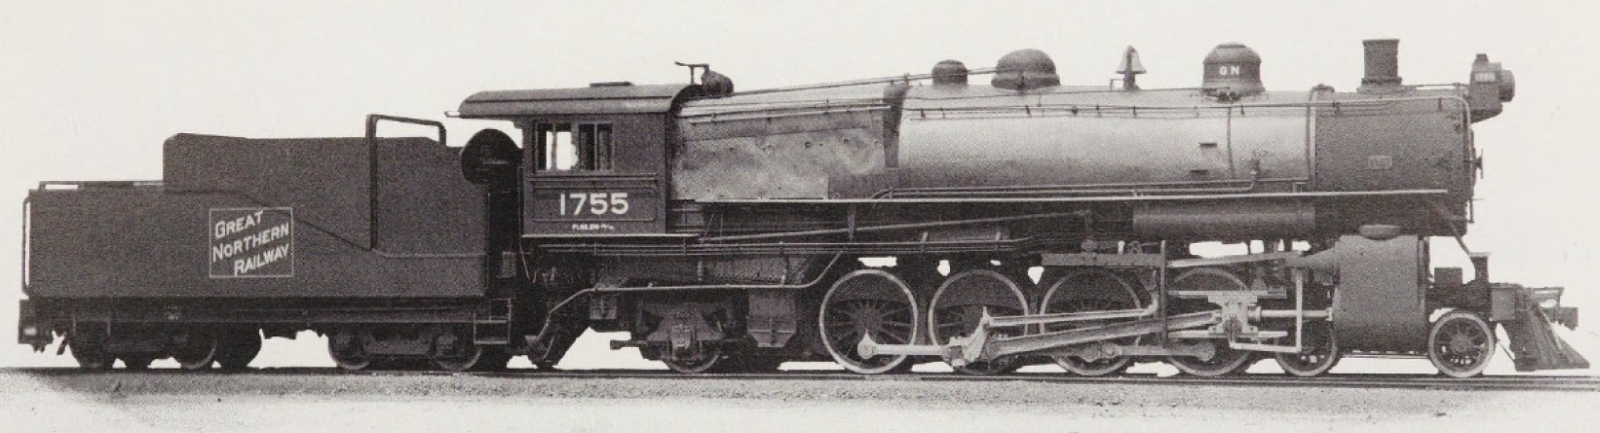 No. 1755 on a works photo